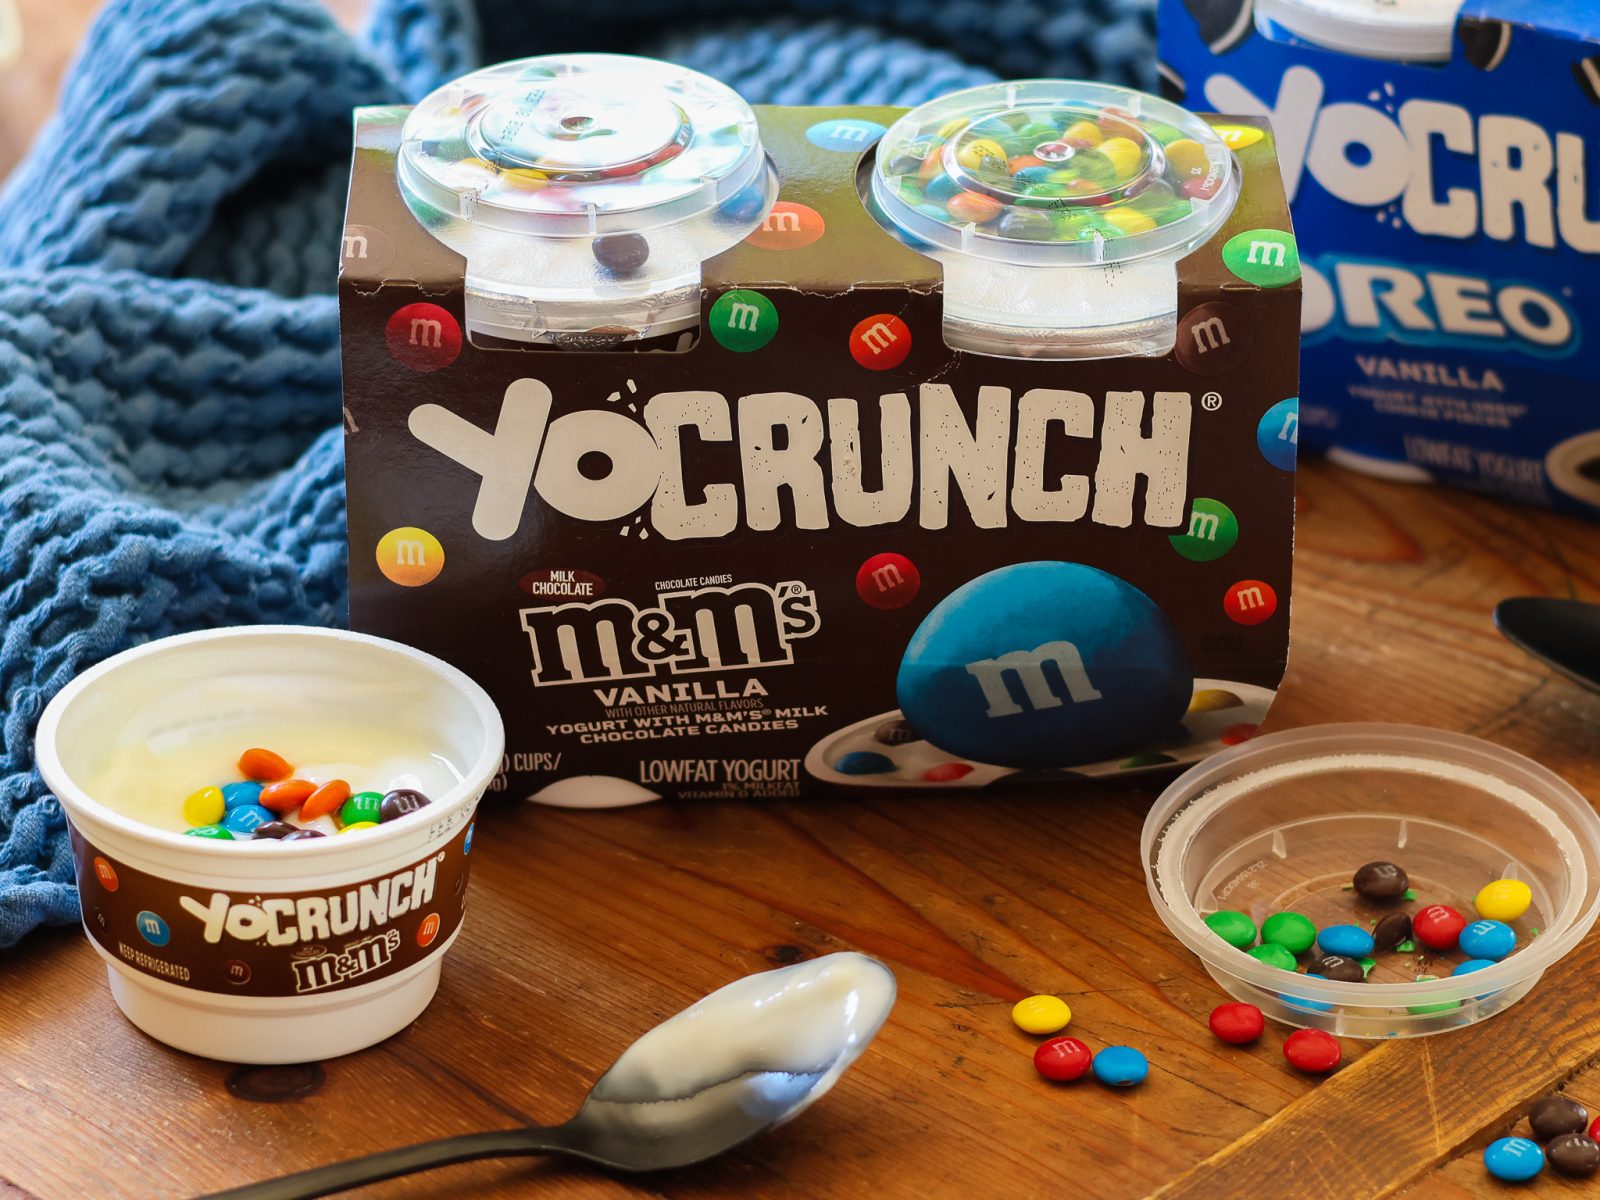 Get The YoCrunch Yogurt 4-Pack For As Low As $1.89 At Kroger